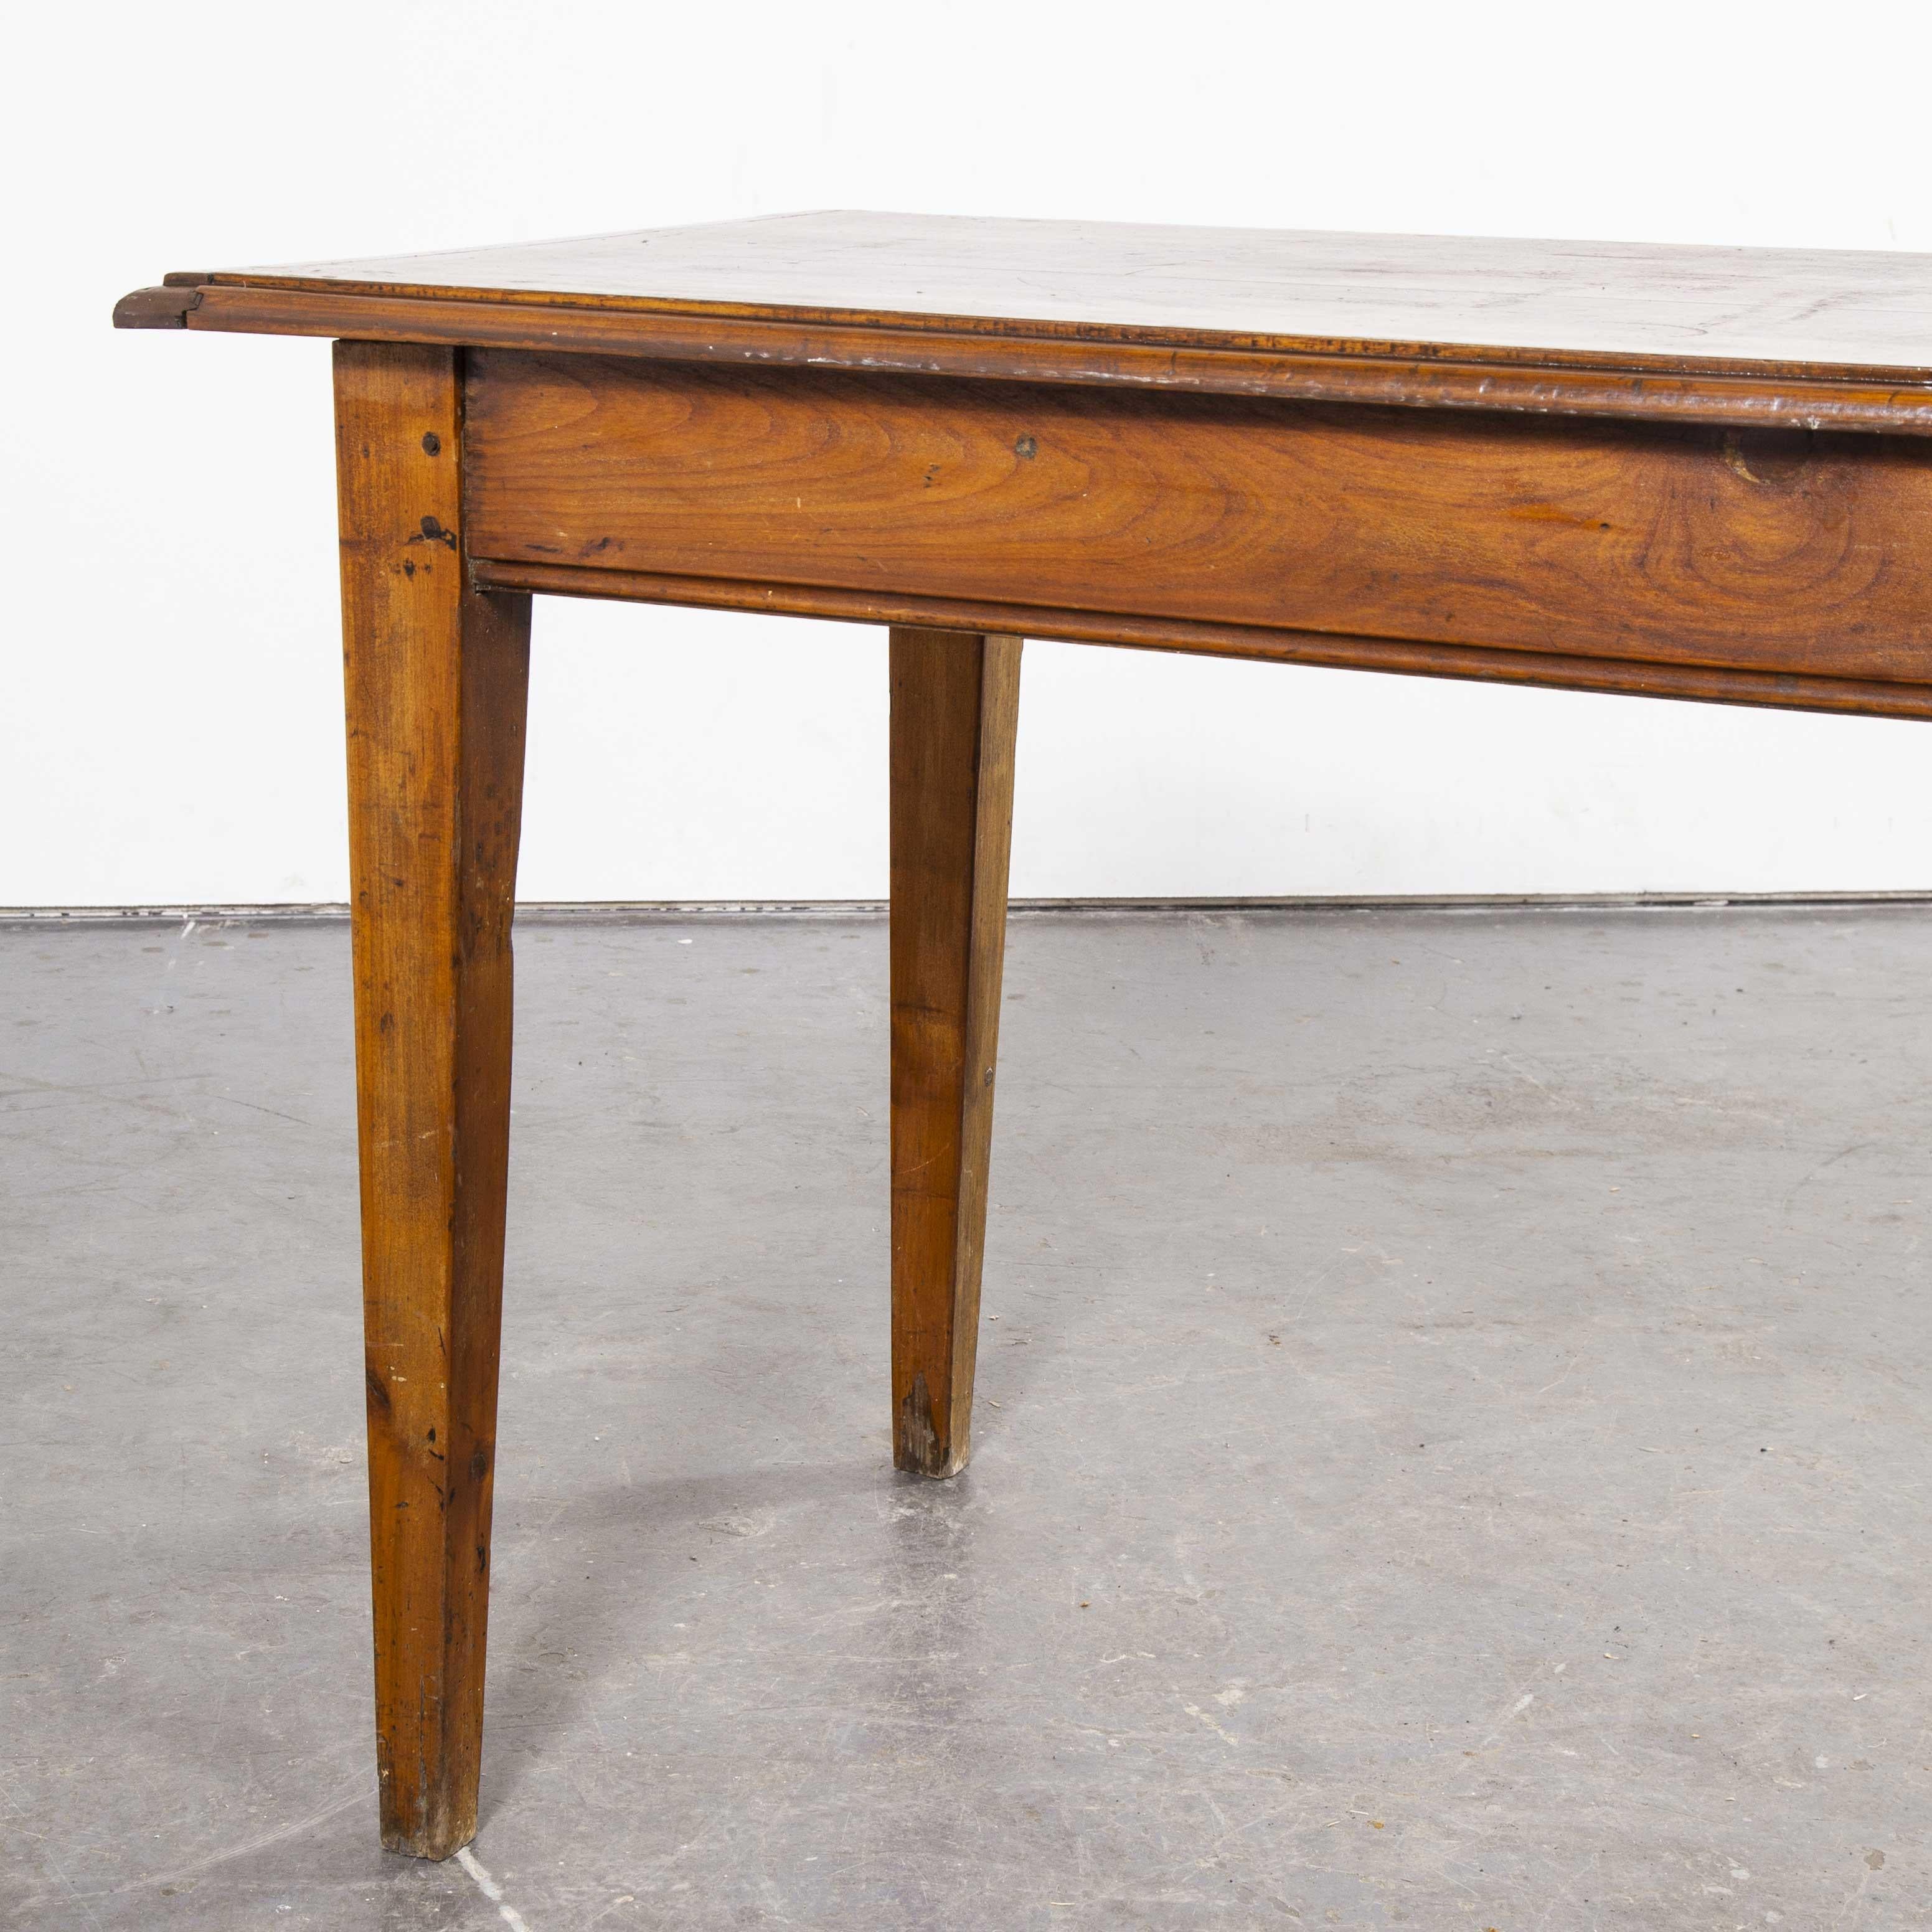 1950s French pear wood rectangular dining table (Model 1)

1950s French pear wood rectangular dining table. Sourced in Alsace this is a good honest solid pear wood rectangular dining table. Good proportions and good detail on the tops and with